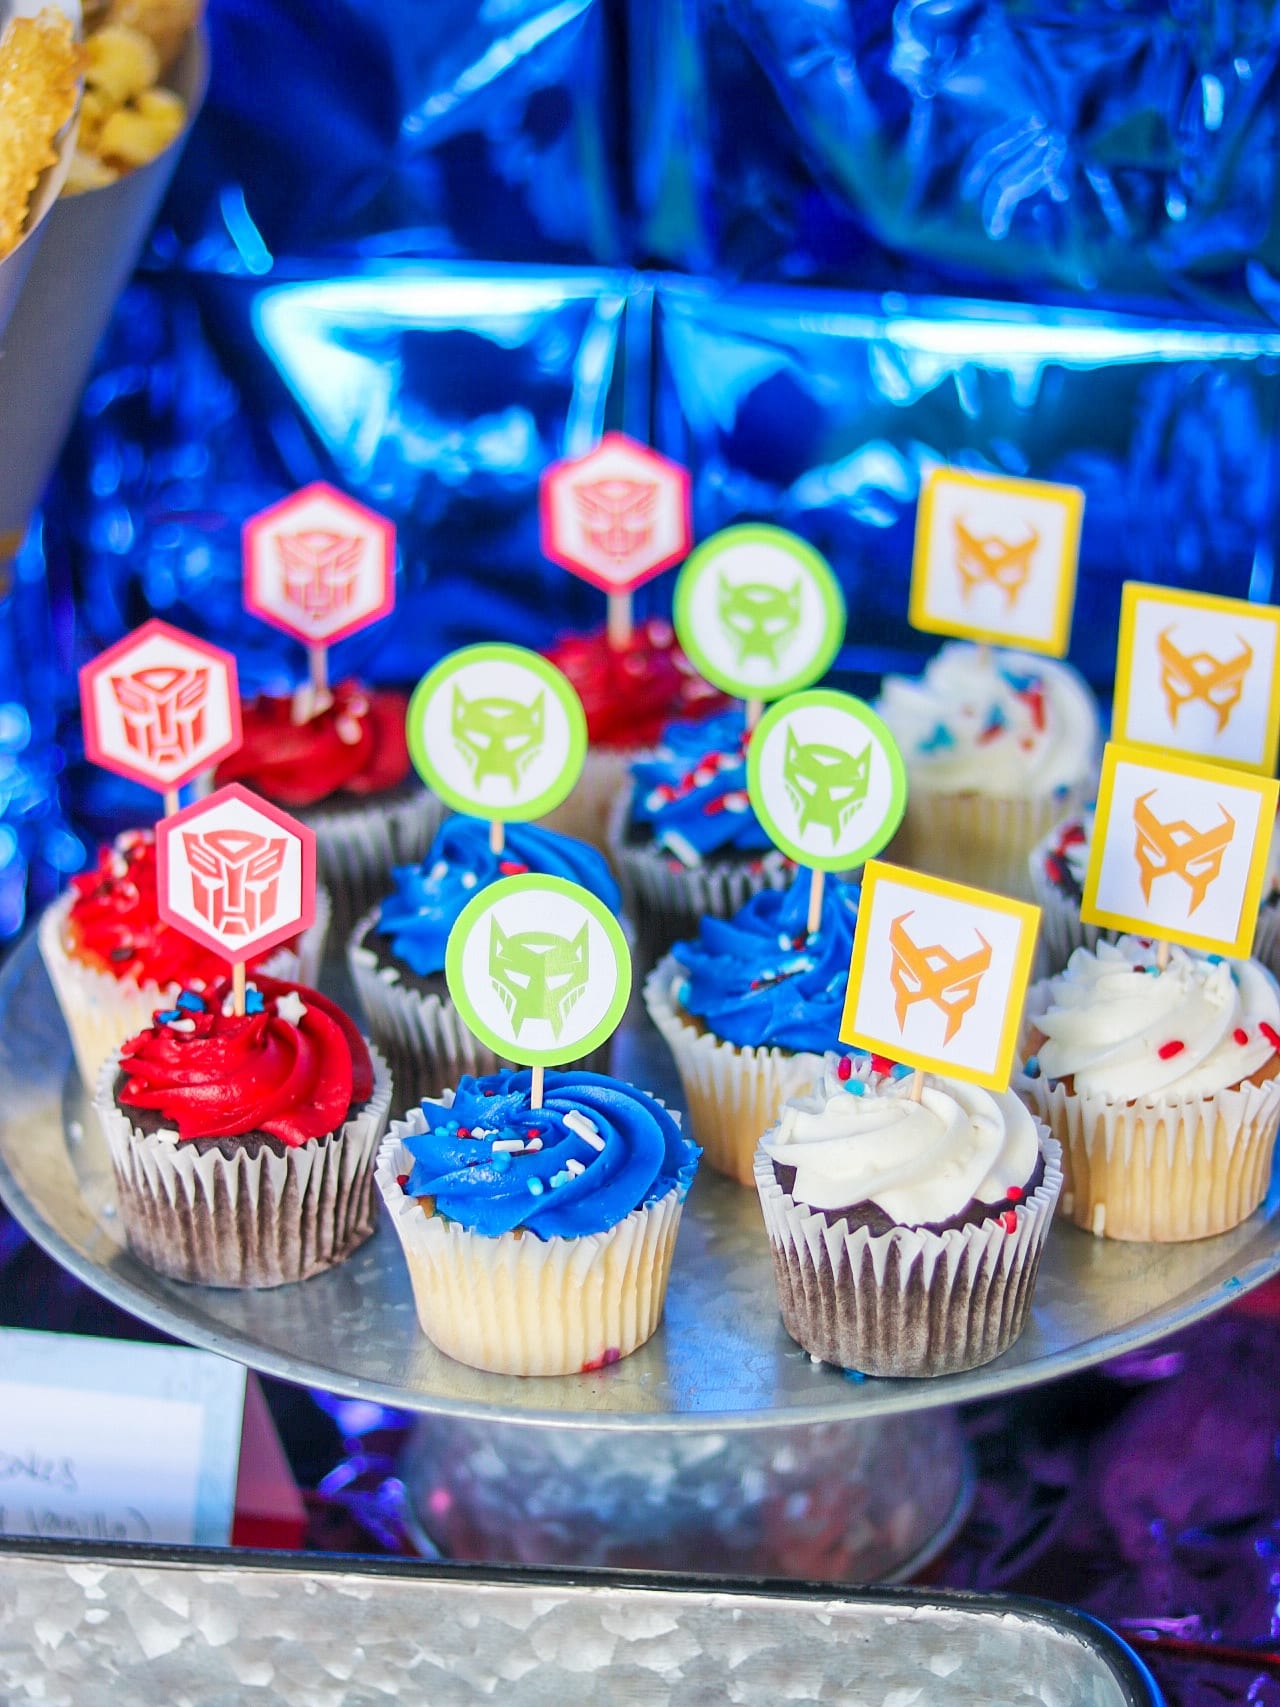 Transformers themed birthday party ideas: DIY TRANSFORMERS Cupcake Toppers